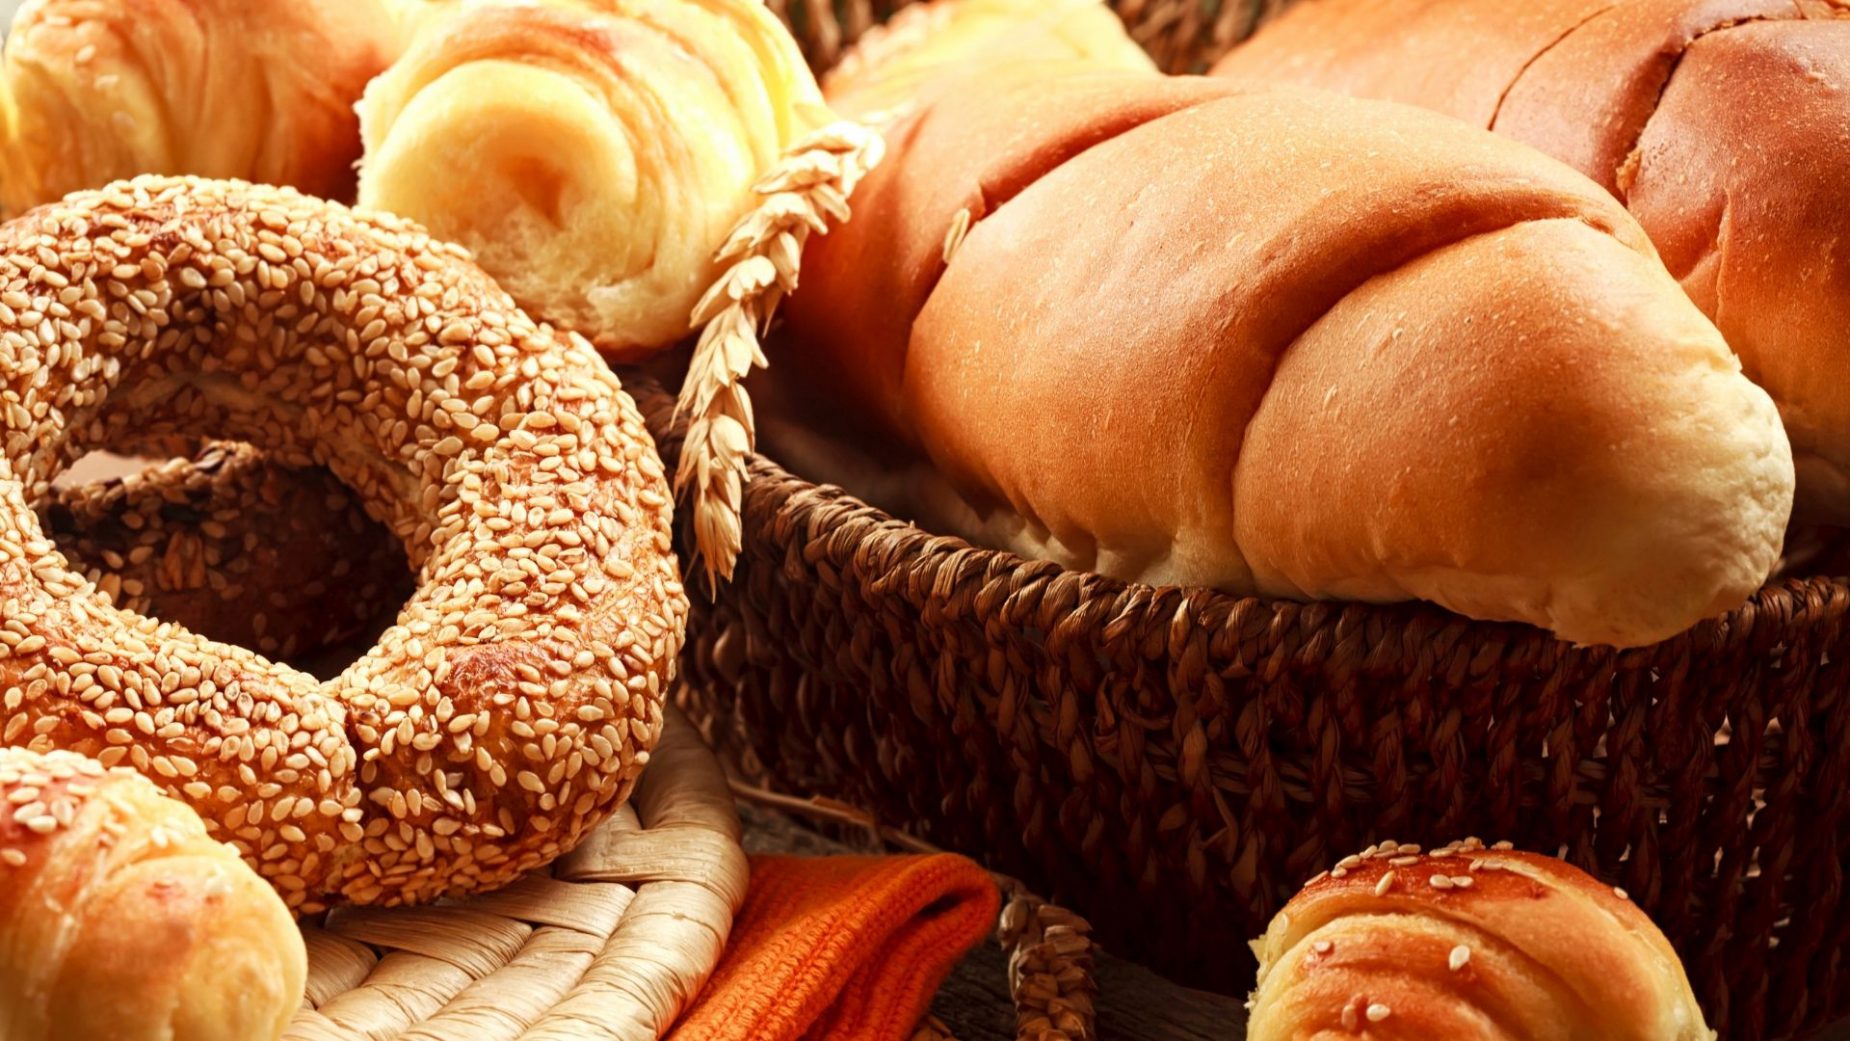 Global Bread And Bakery Products Market Outlook, Opportunities And Strategies